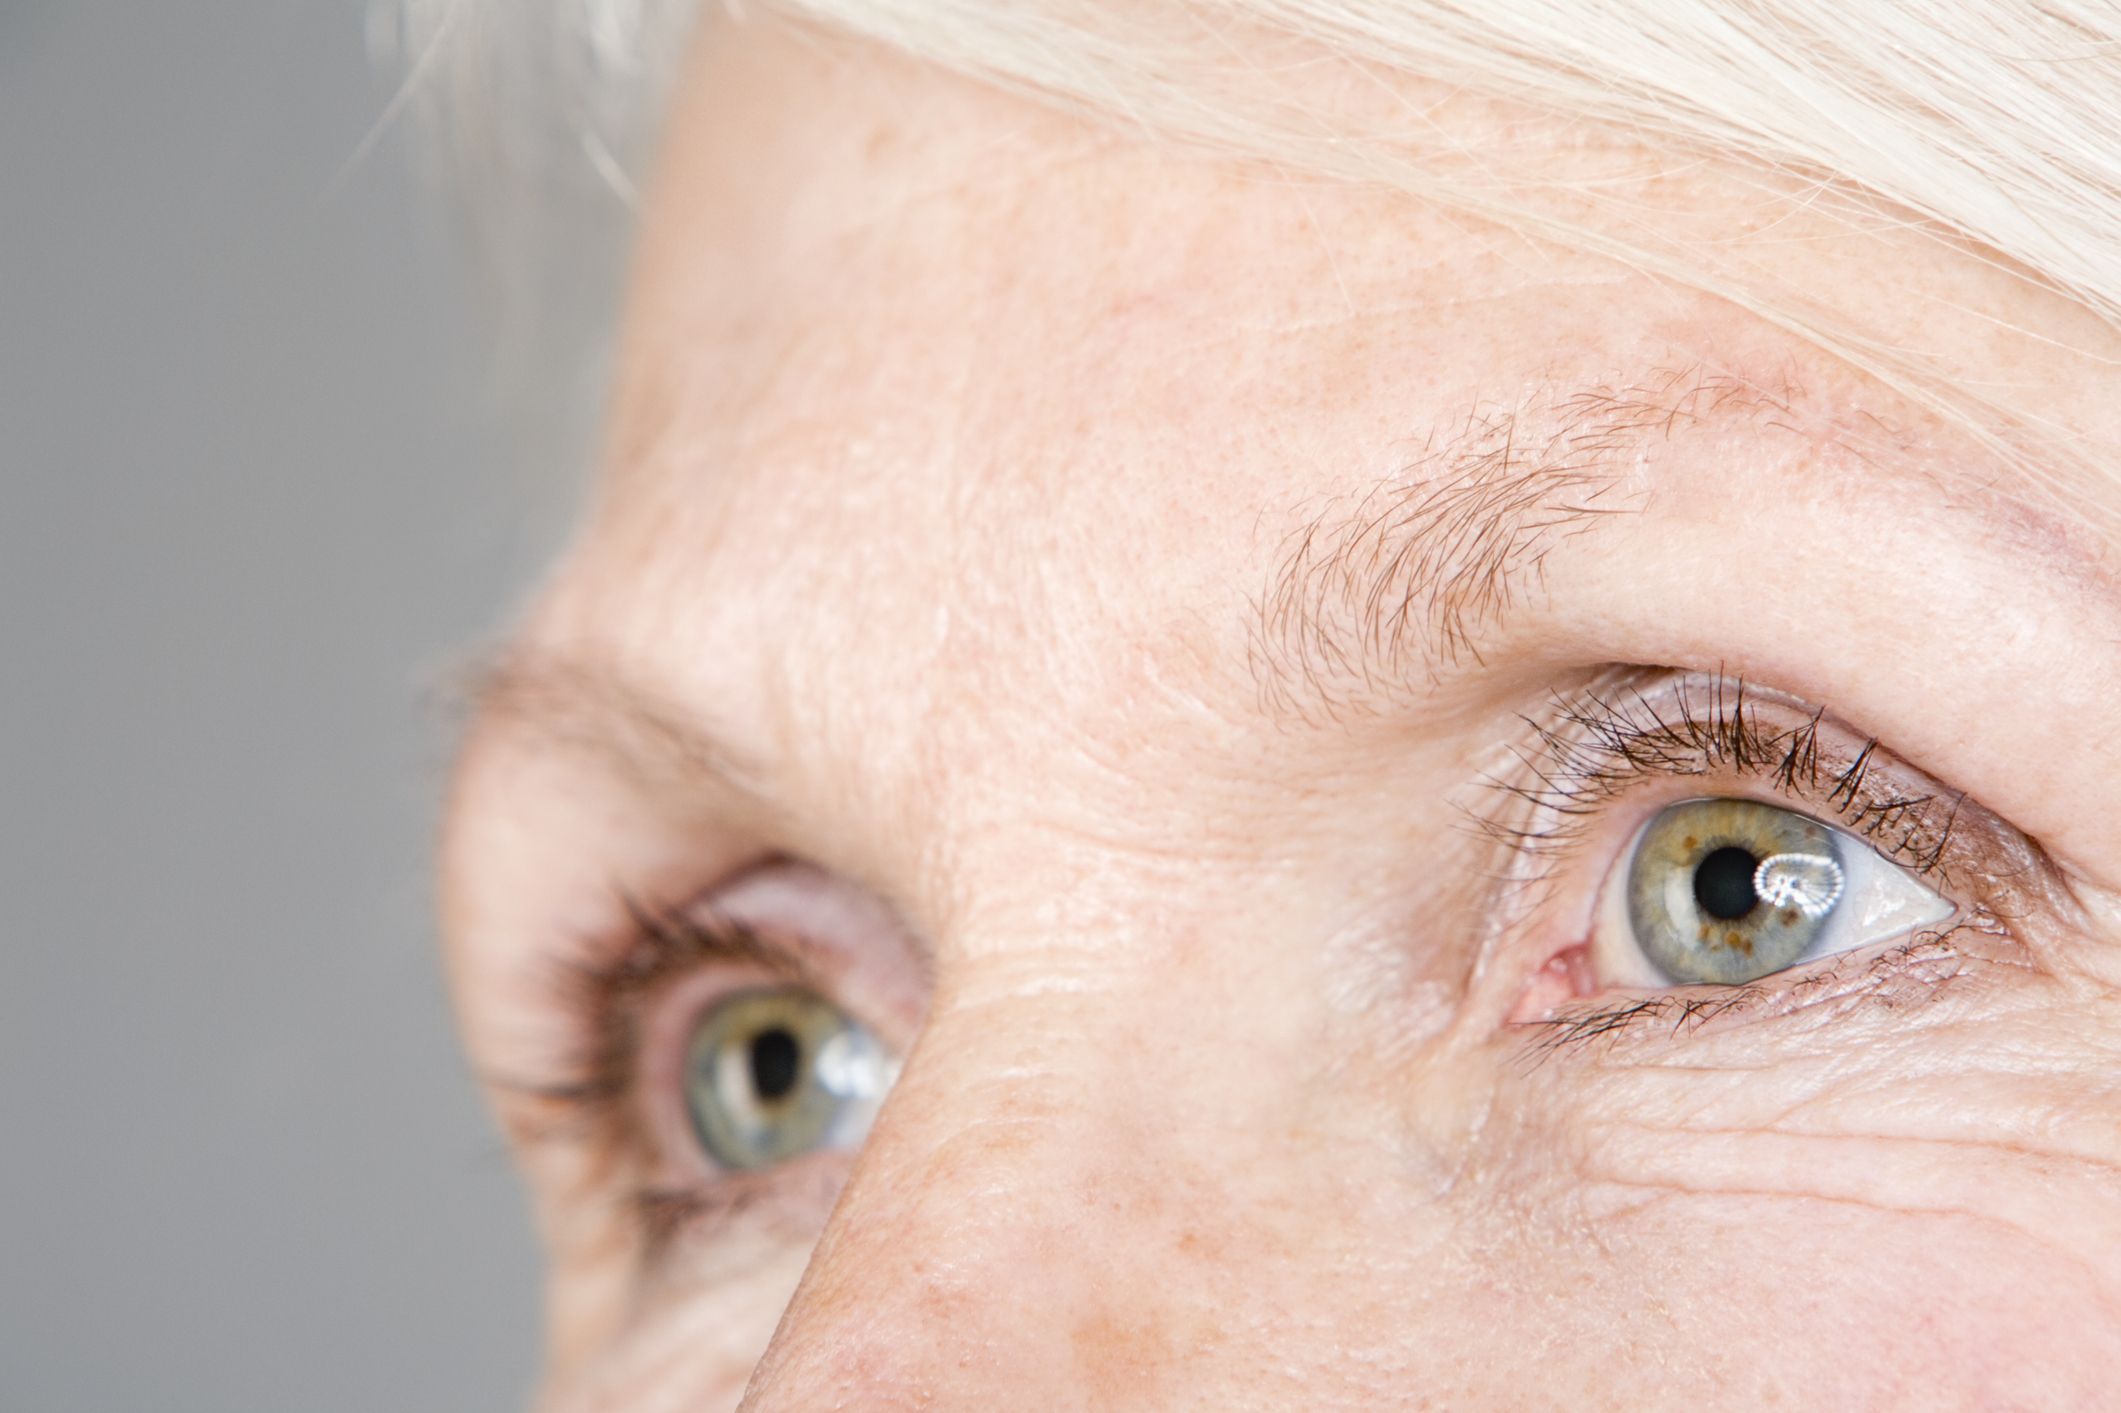 Age-related macular degeneration impacts 2.5 million Canadians over 55.